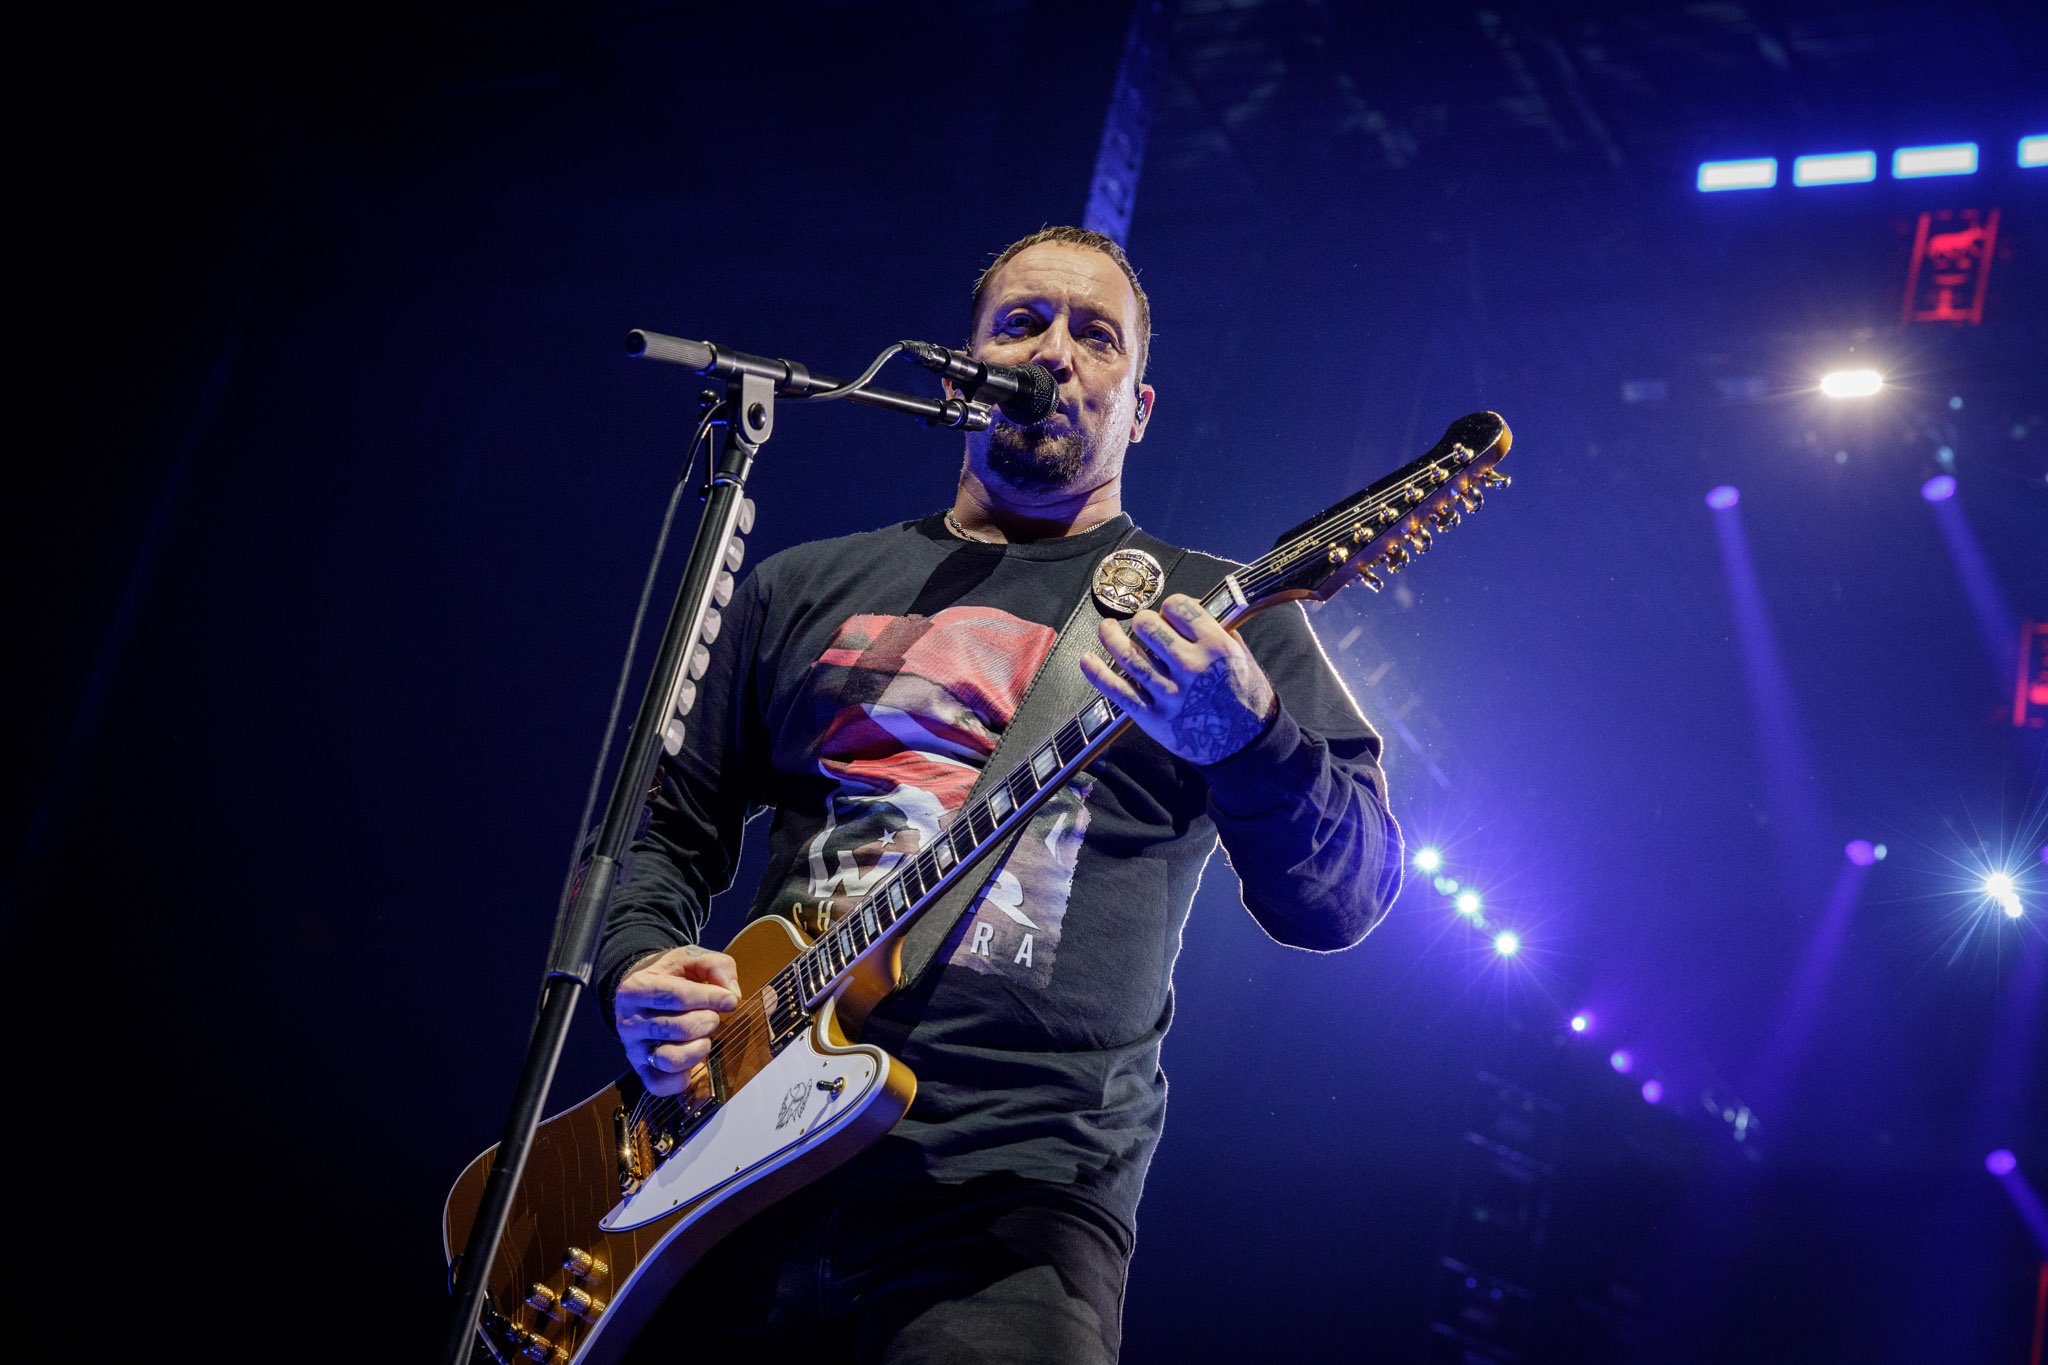 Volbeat at the First Direct Arena in Leeds on December 16th 2022